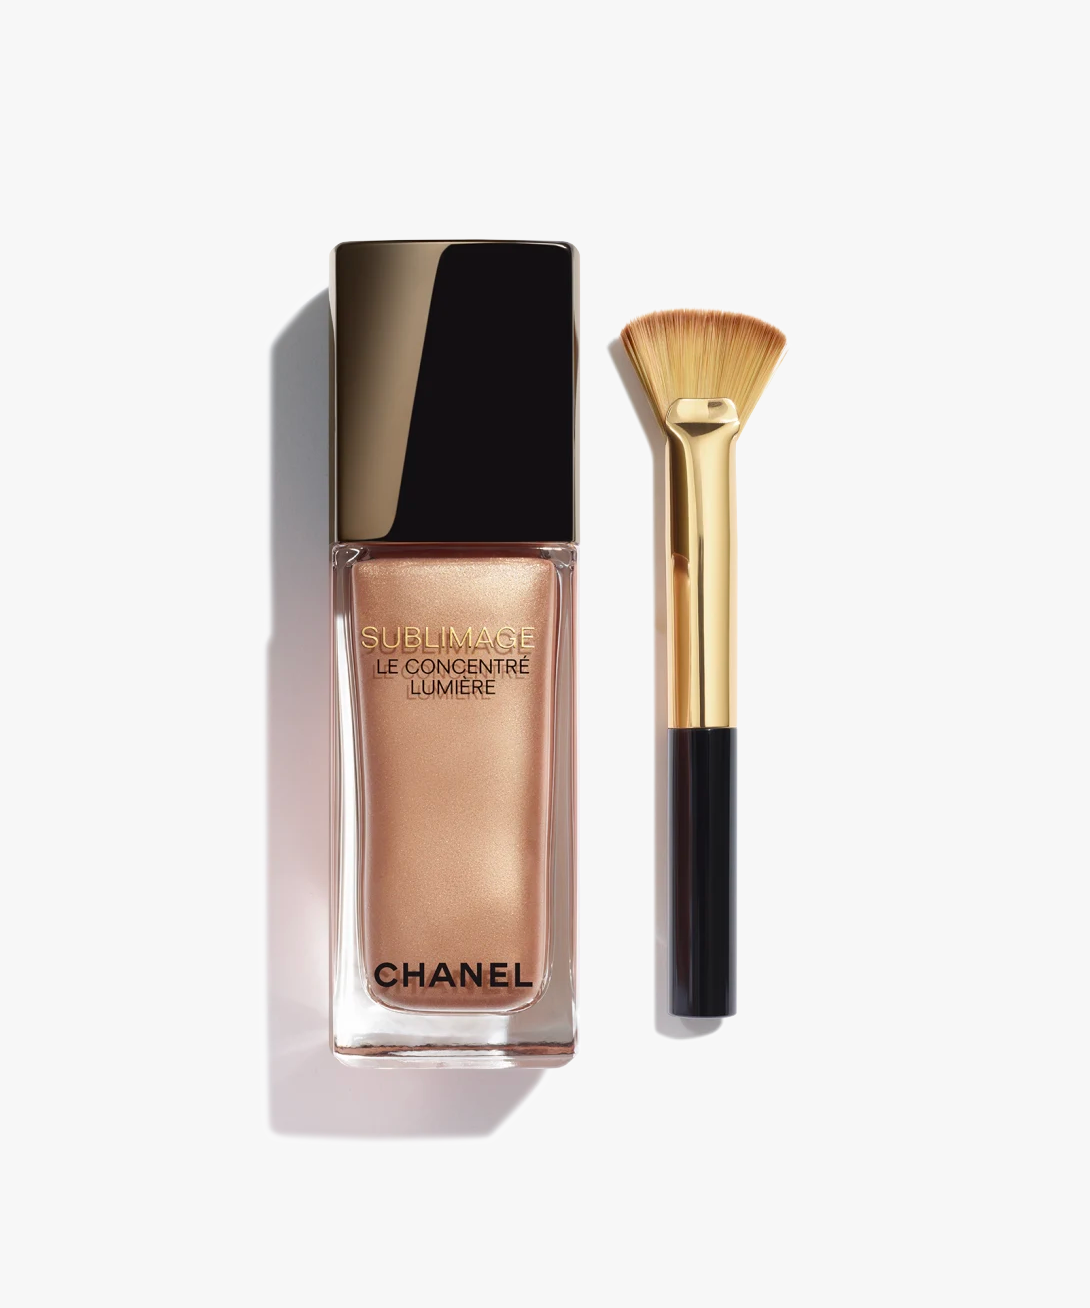 CHANEL ULTRA LE TEINT FOUNDATION VERSUS CHANEL ULTRA LE TEINT